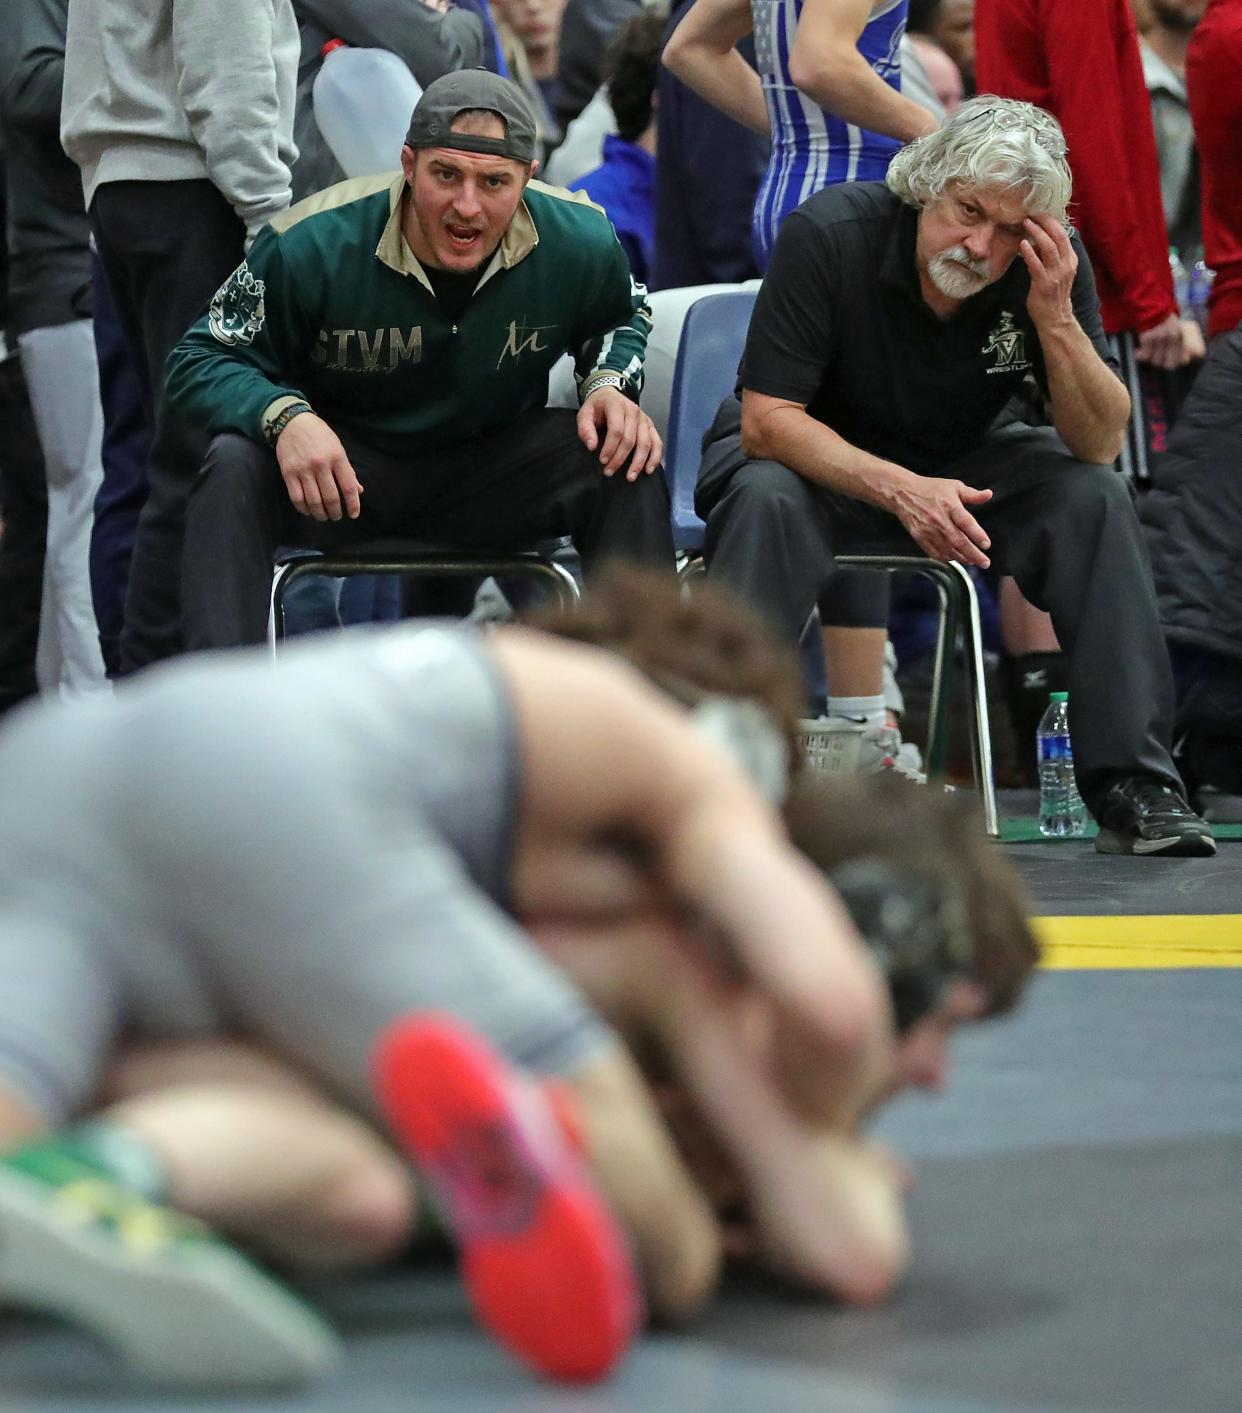 STVM wrestling coach Nic Skonieczny, left, gives instructions to one of his wrestlers during the Ironman at Walsh Jesuit, Friday, Dec. 8, 2023.